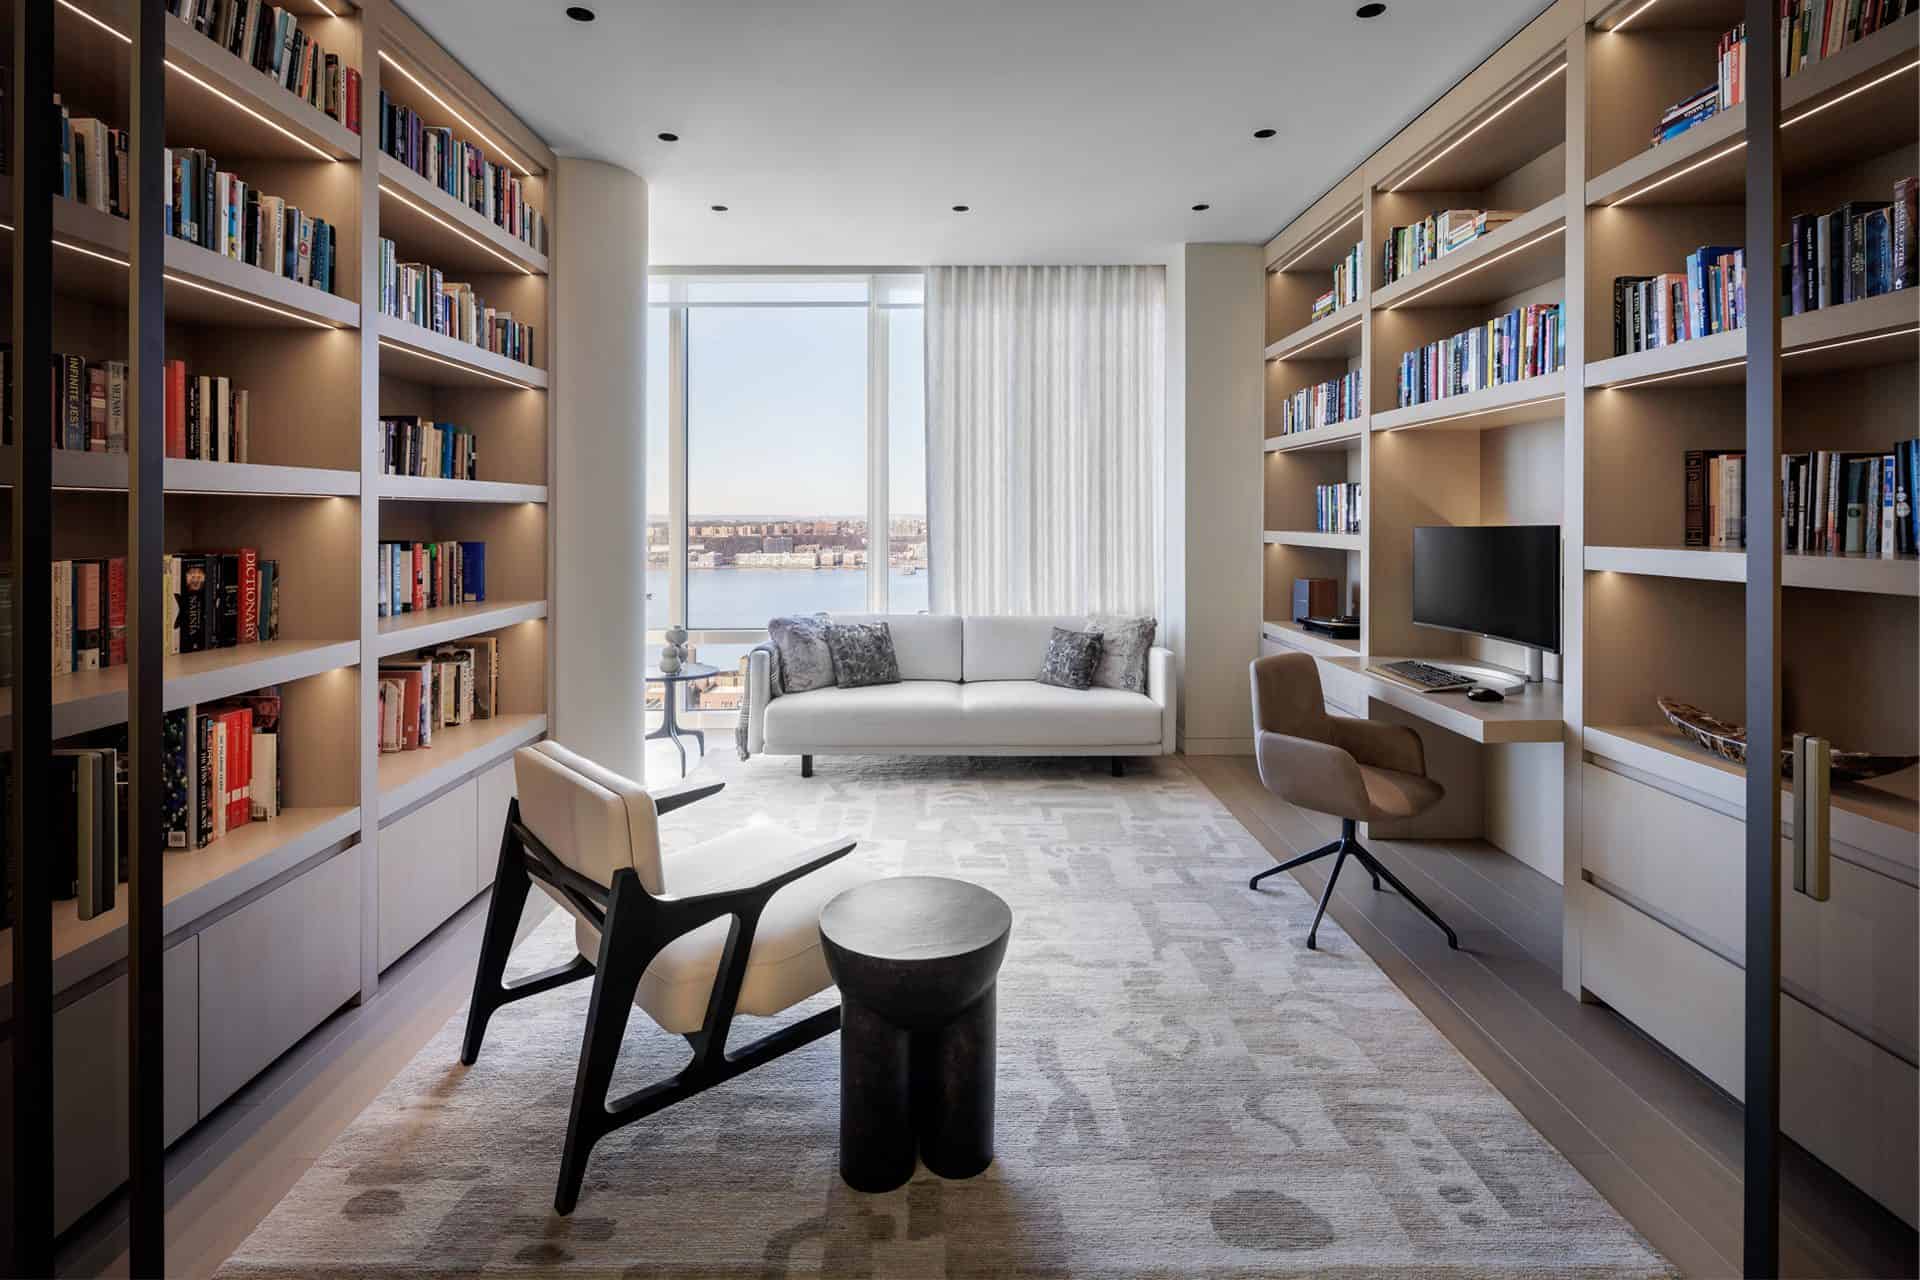 View of study of book shelves and desk area with Bilotta millwork , chair, couch and tables, with a window looking out on the Hudson River